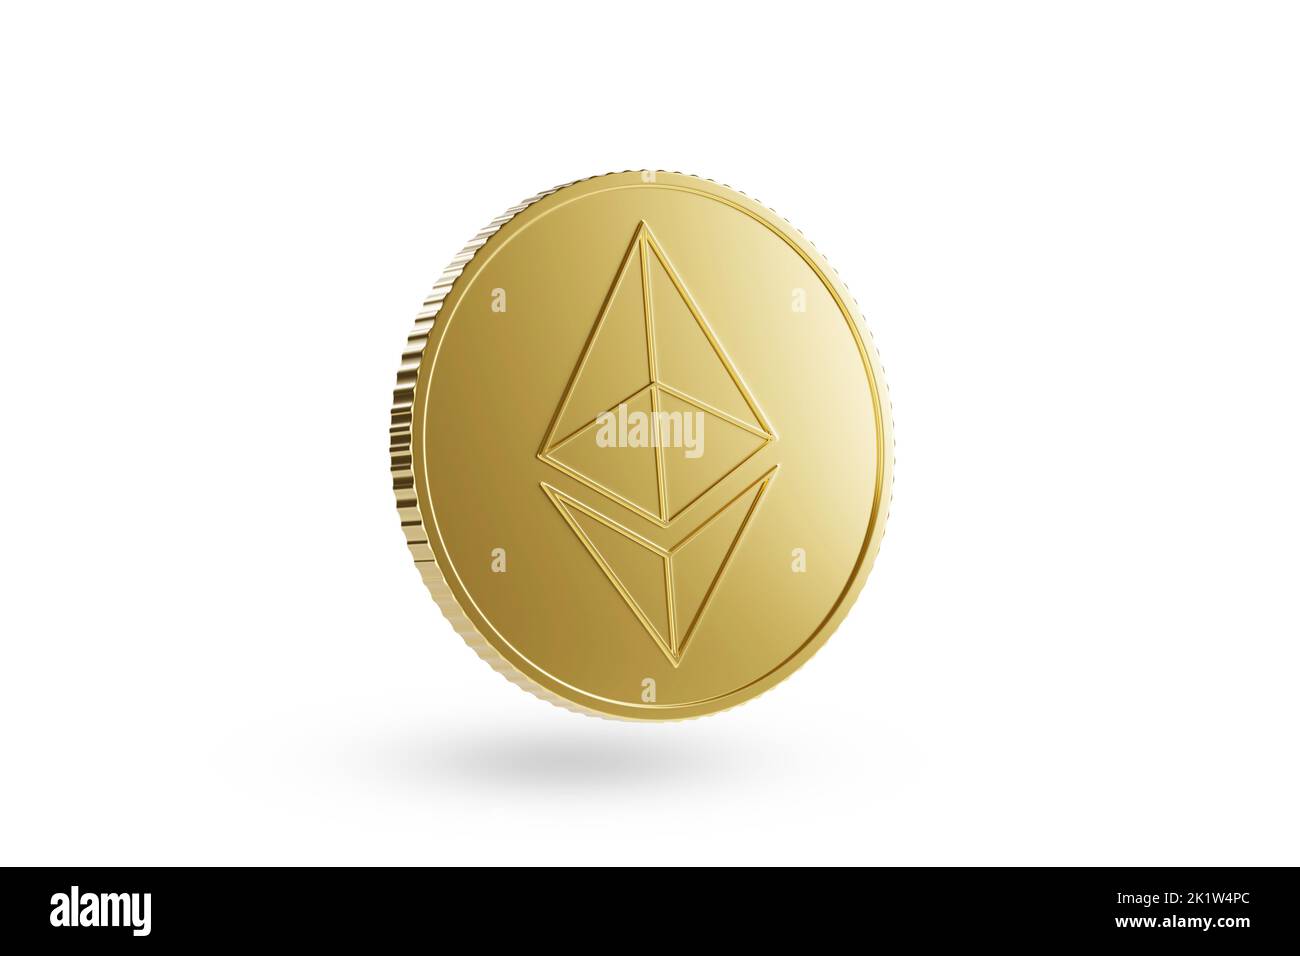 Ethereum golden coin isolated on white background. 3d illustration. Stock Photo